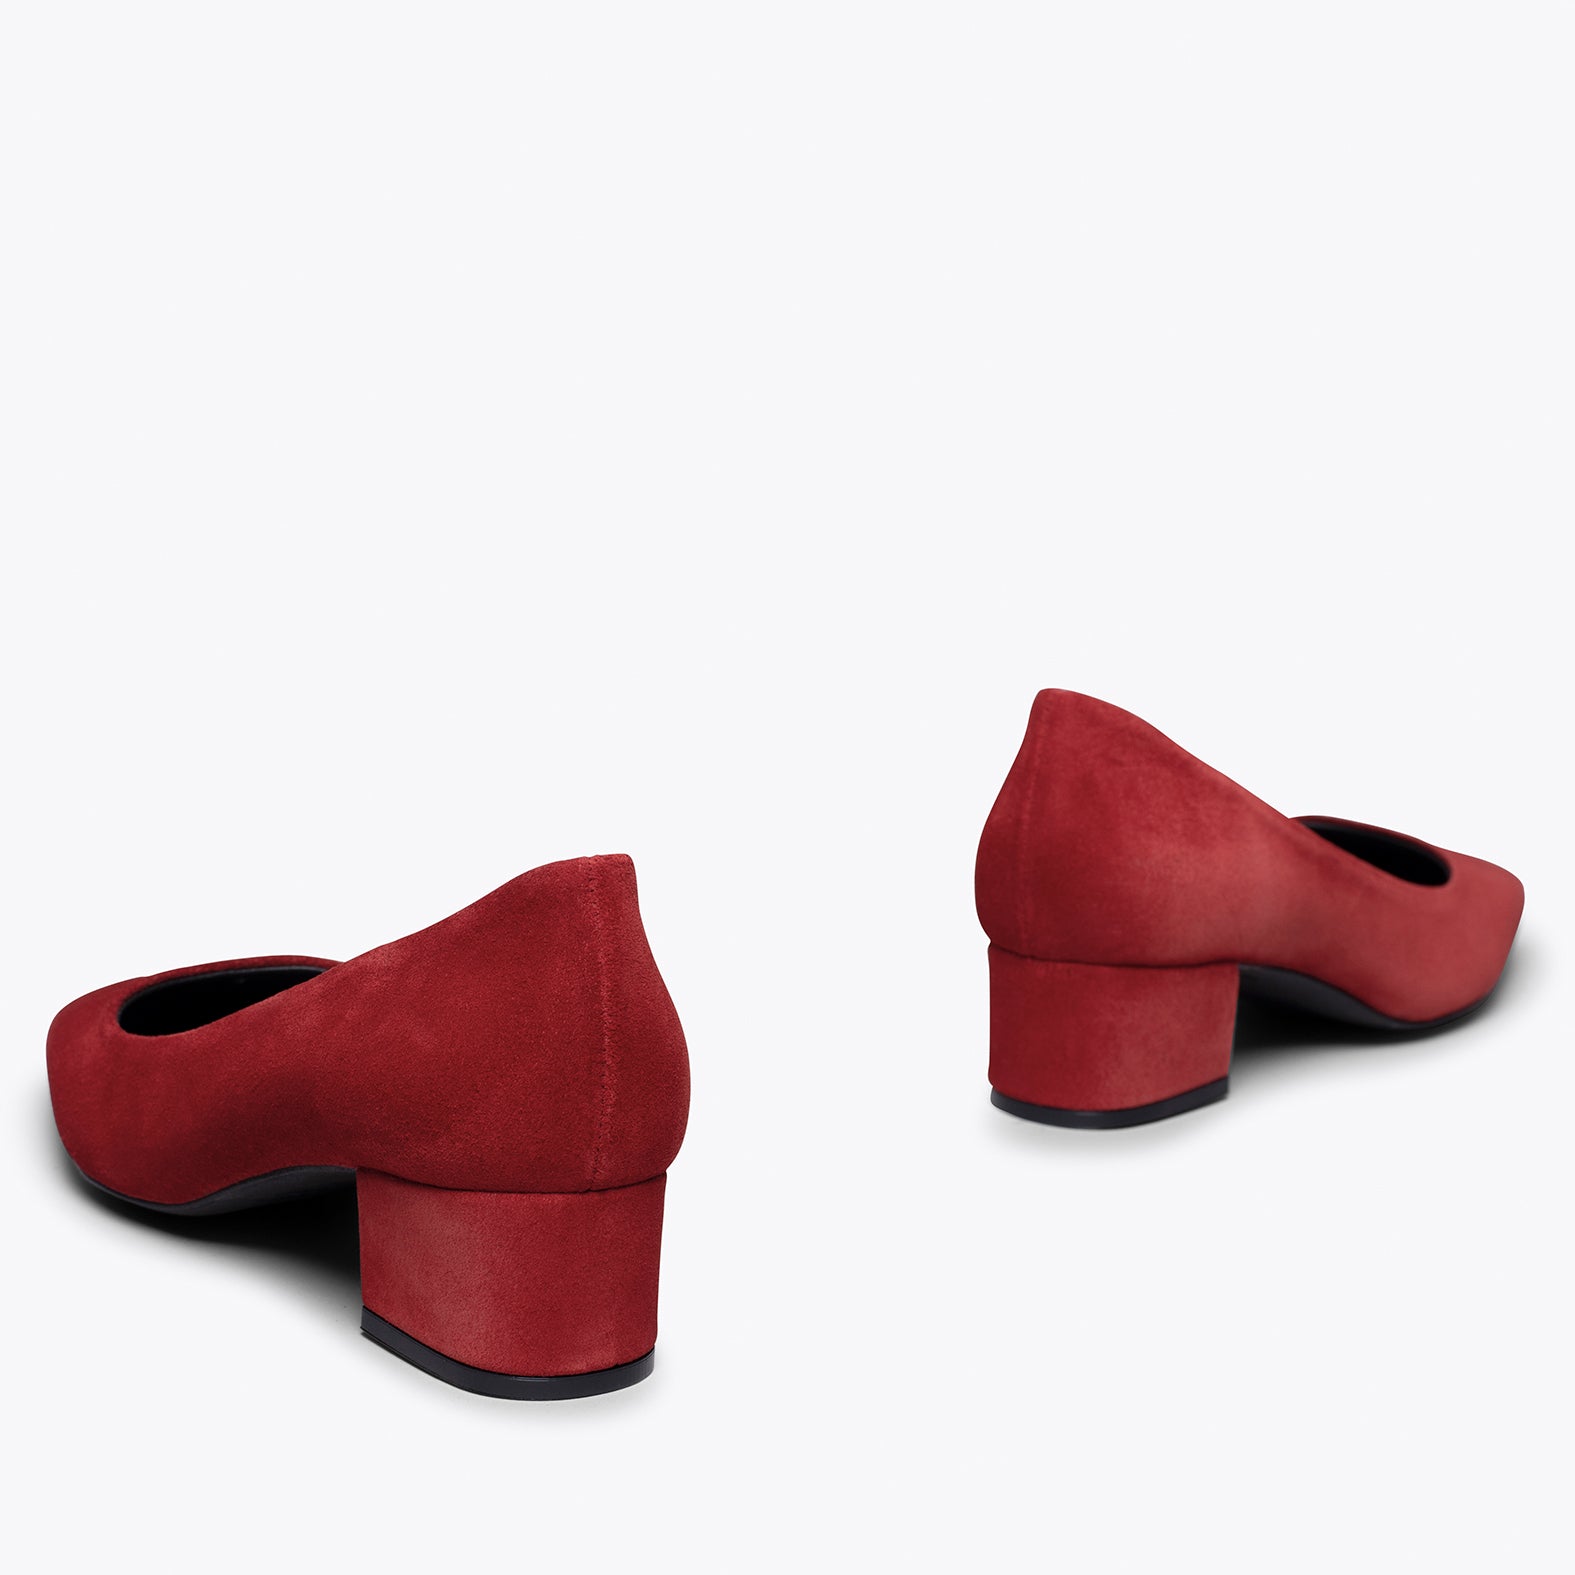 TREND – RED square pointed mid heel